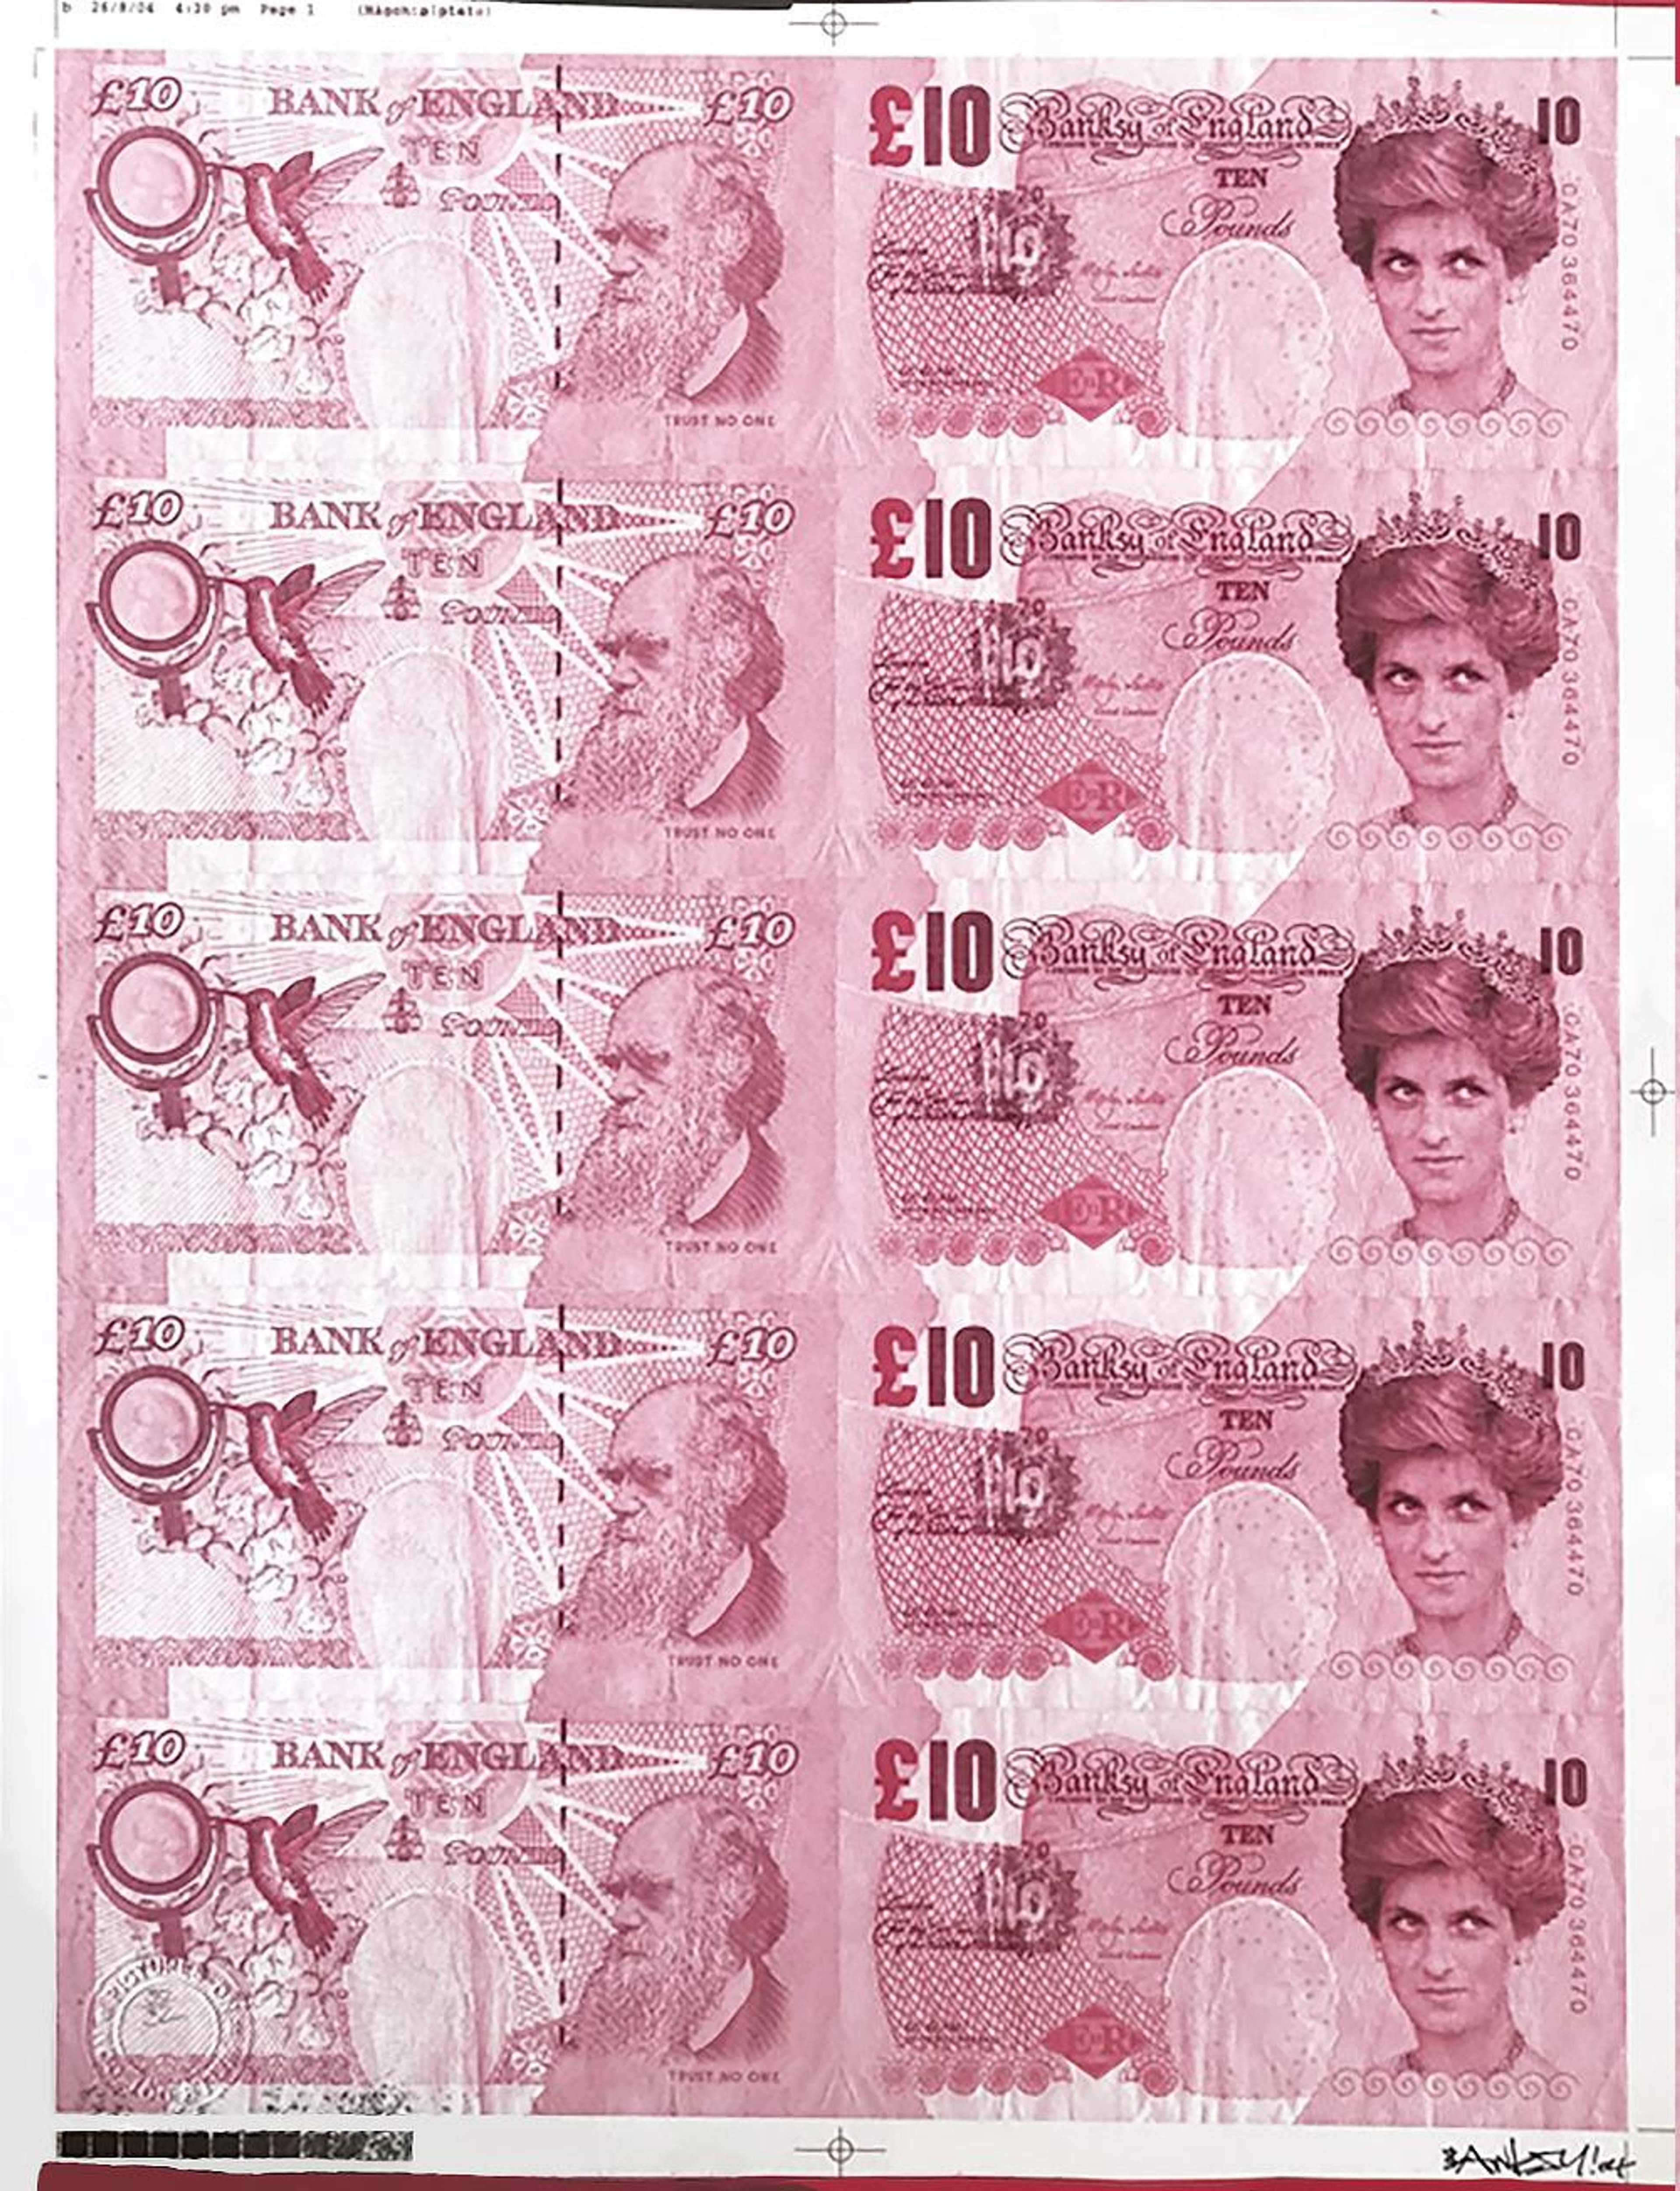 10 Facts About Banksy's Di-Faced Tenner